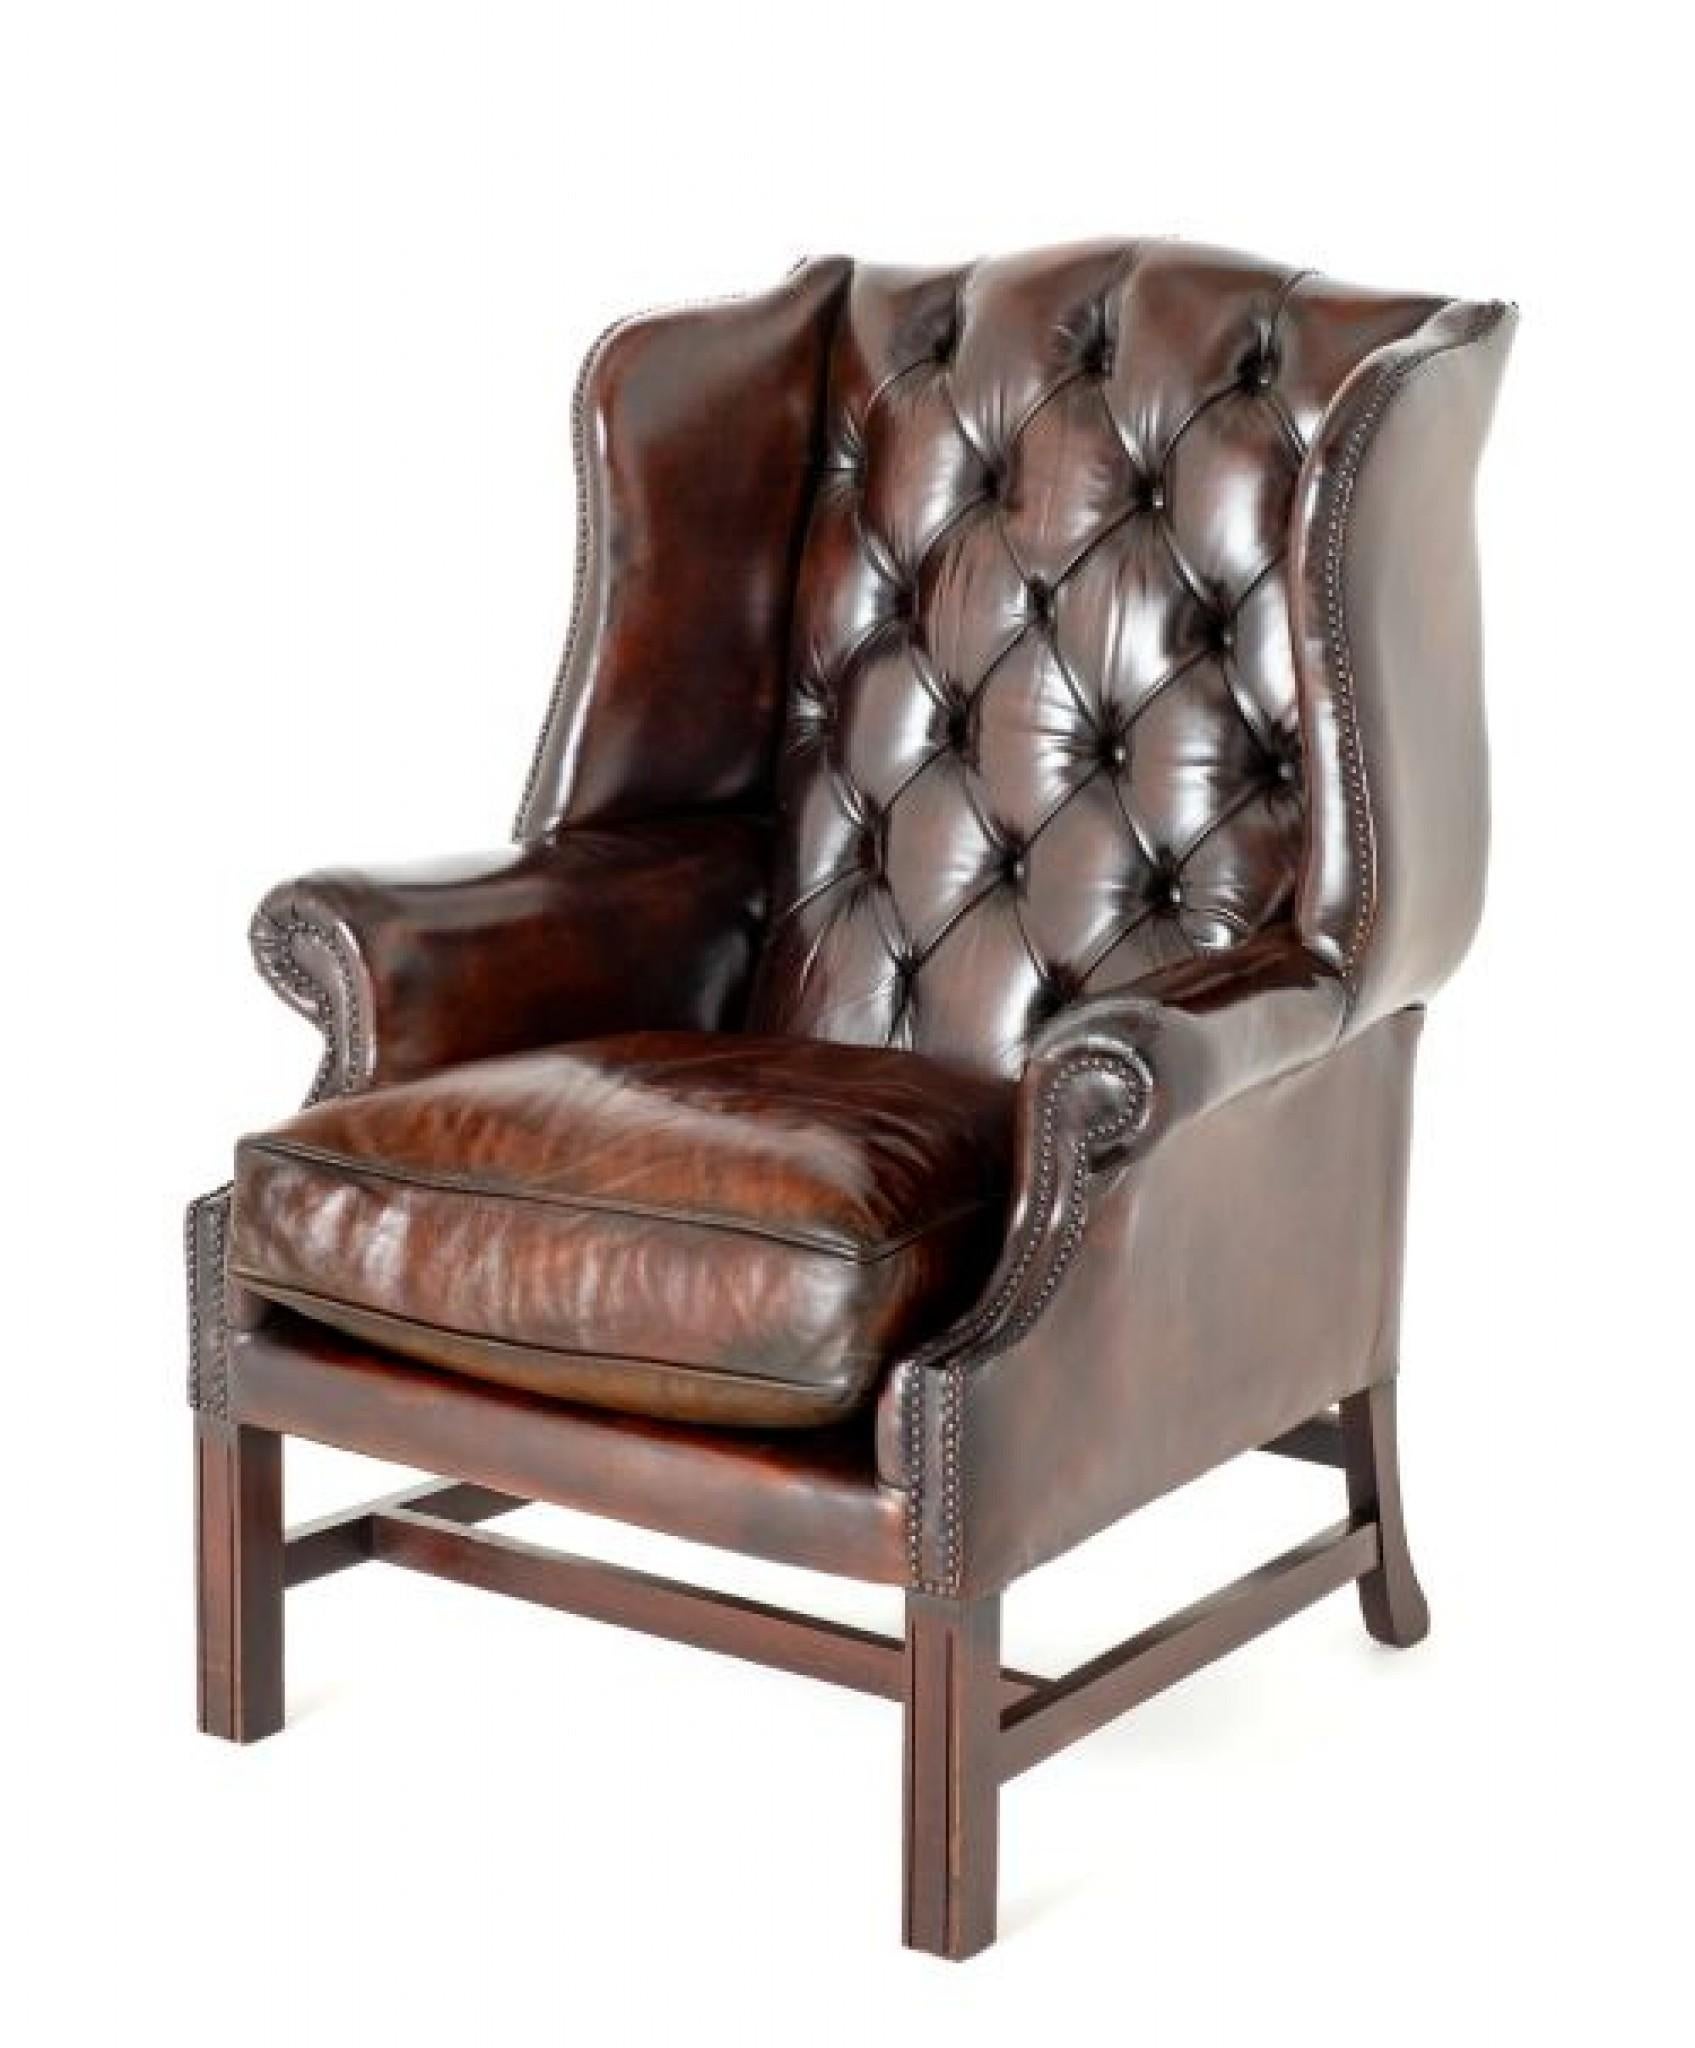 Georgian Revival Leather Wing Chair.
A leather wing chair is a classic piece of furniture typically featuring a high back with 